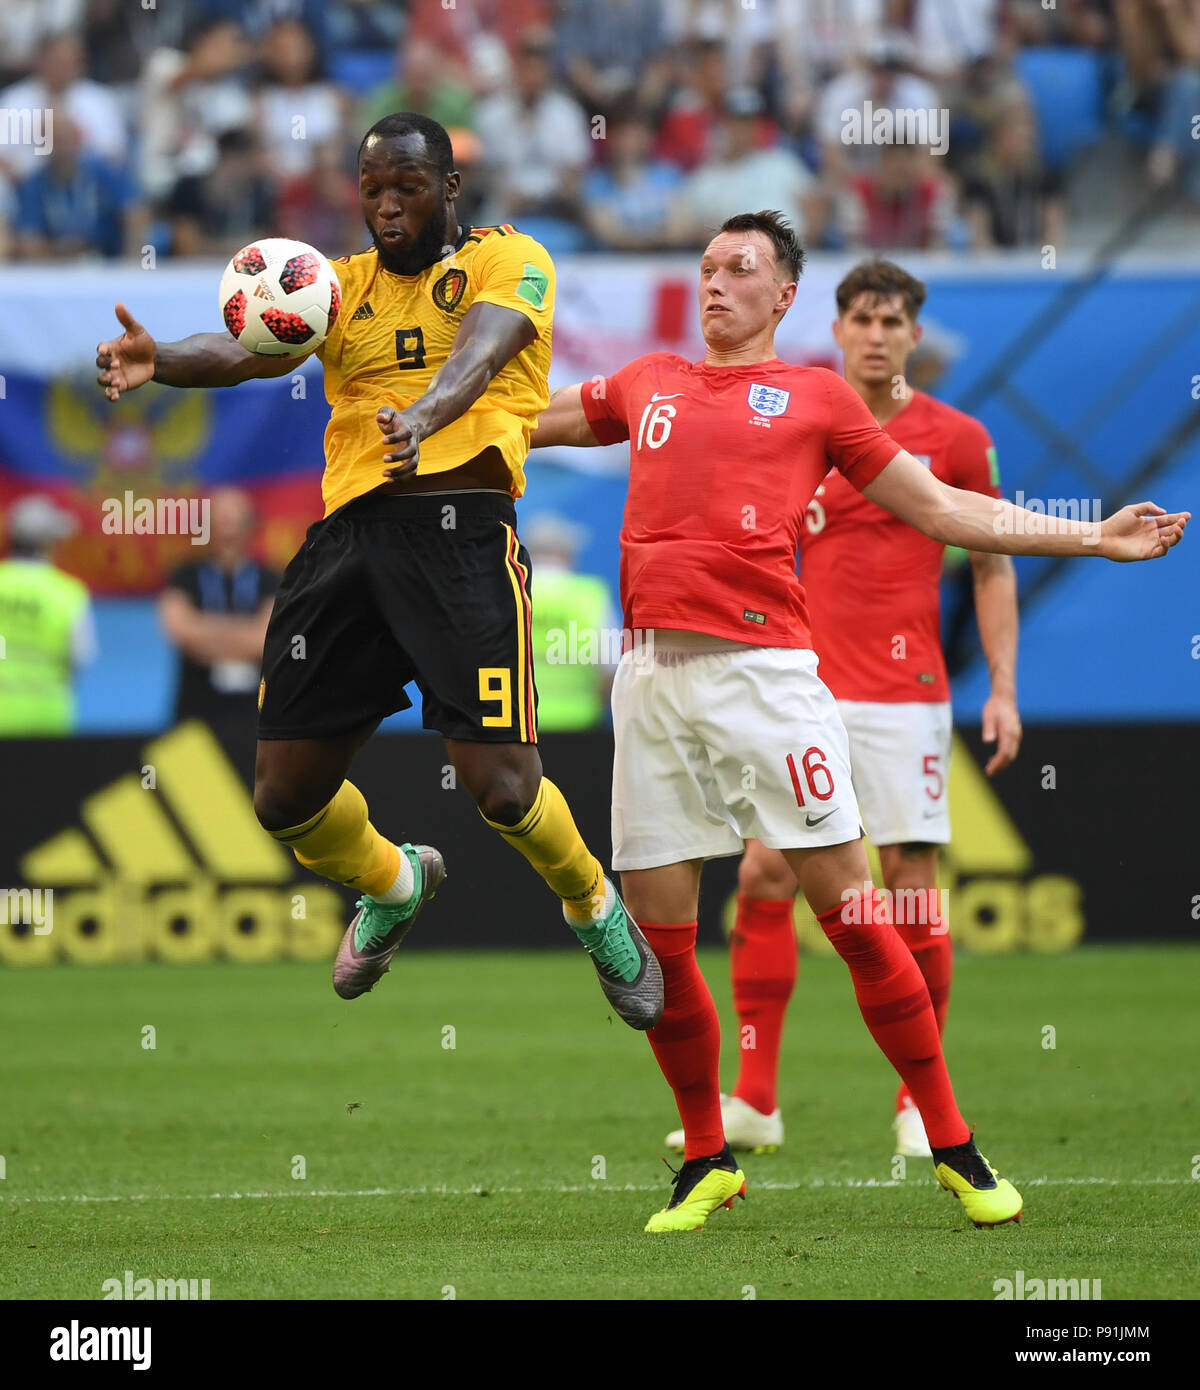 Saint Petersburg, Russia. 14th July, 2018. Phil Jones (R front) of England vies with Romelu Lukaku (L front) of Belgium during the 2018 FIFA World Cup third place play-off match between England and Belgium in Saint Petersburg, Russia, July 14, 2018. Credit: Li Ga/Xinhua/Alamy Live News Credit: Xinhua/Alamy Live News Stock Photo